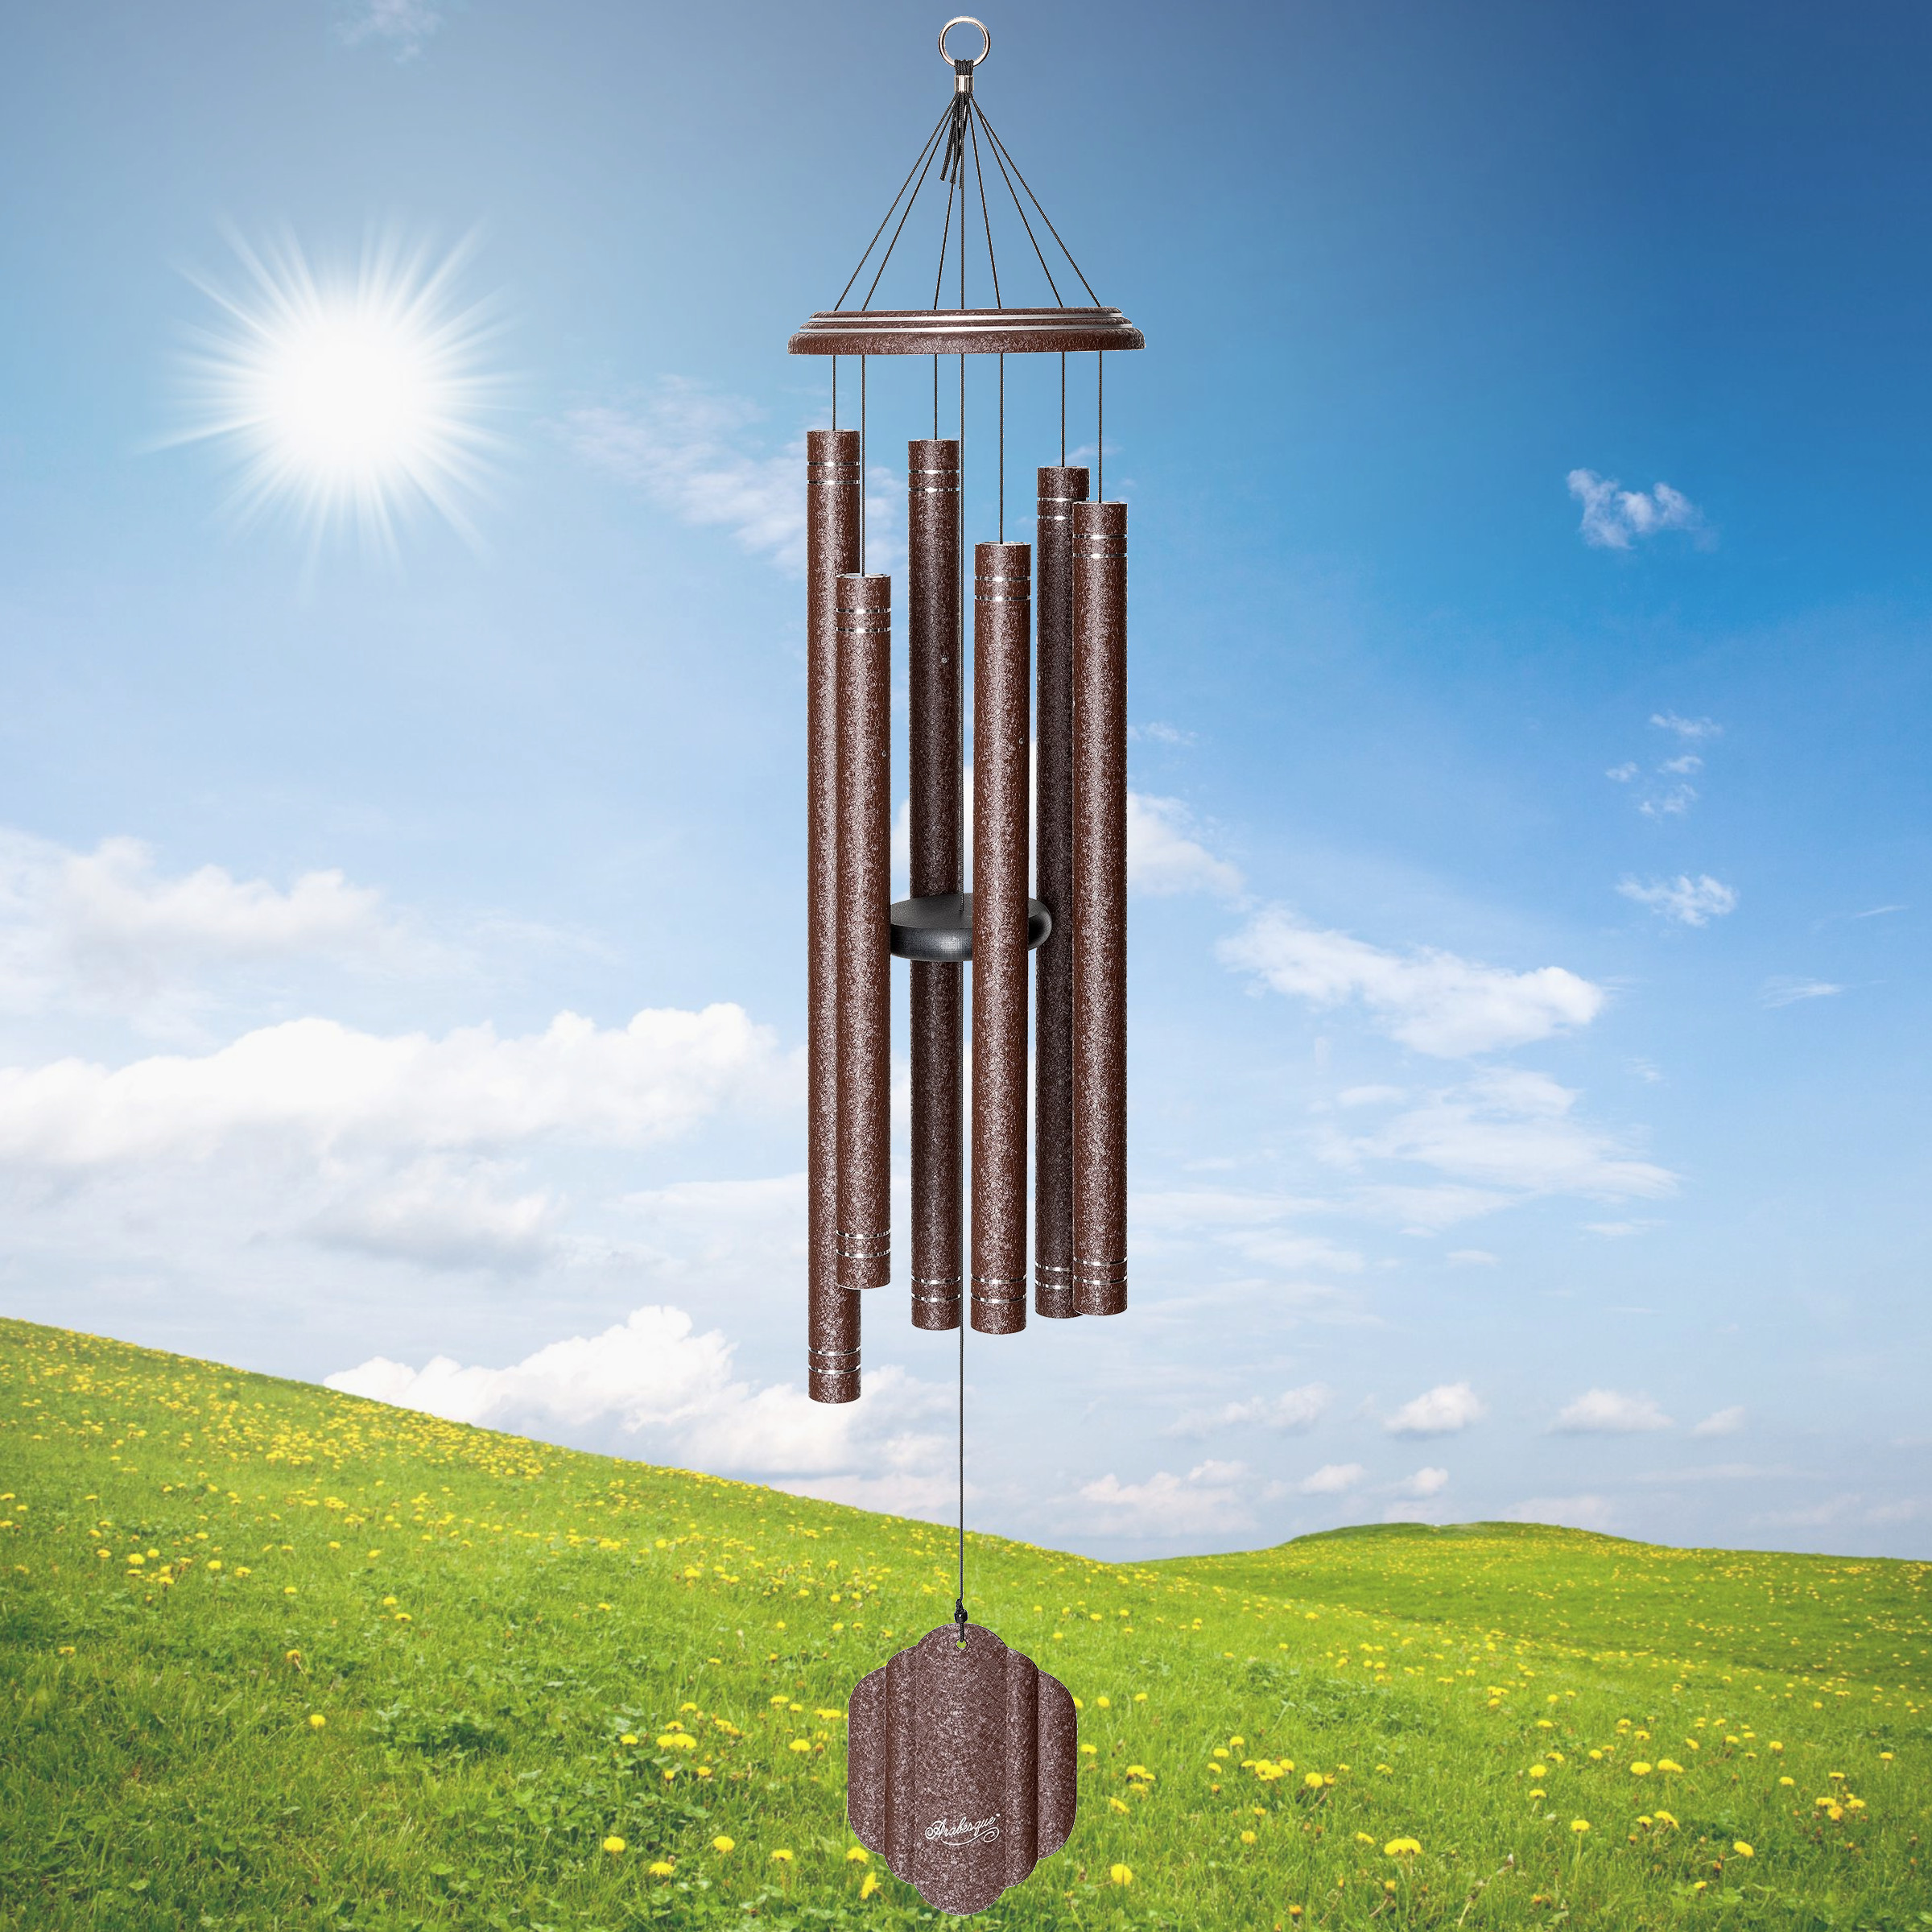 Arabesque 50 Inch Chocolate Diamond Wind Chime - Scale Of A